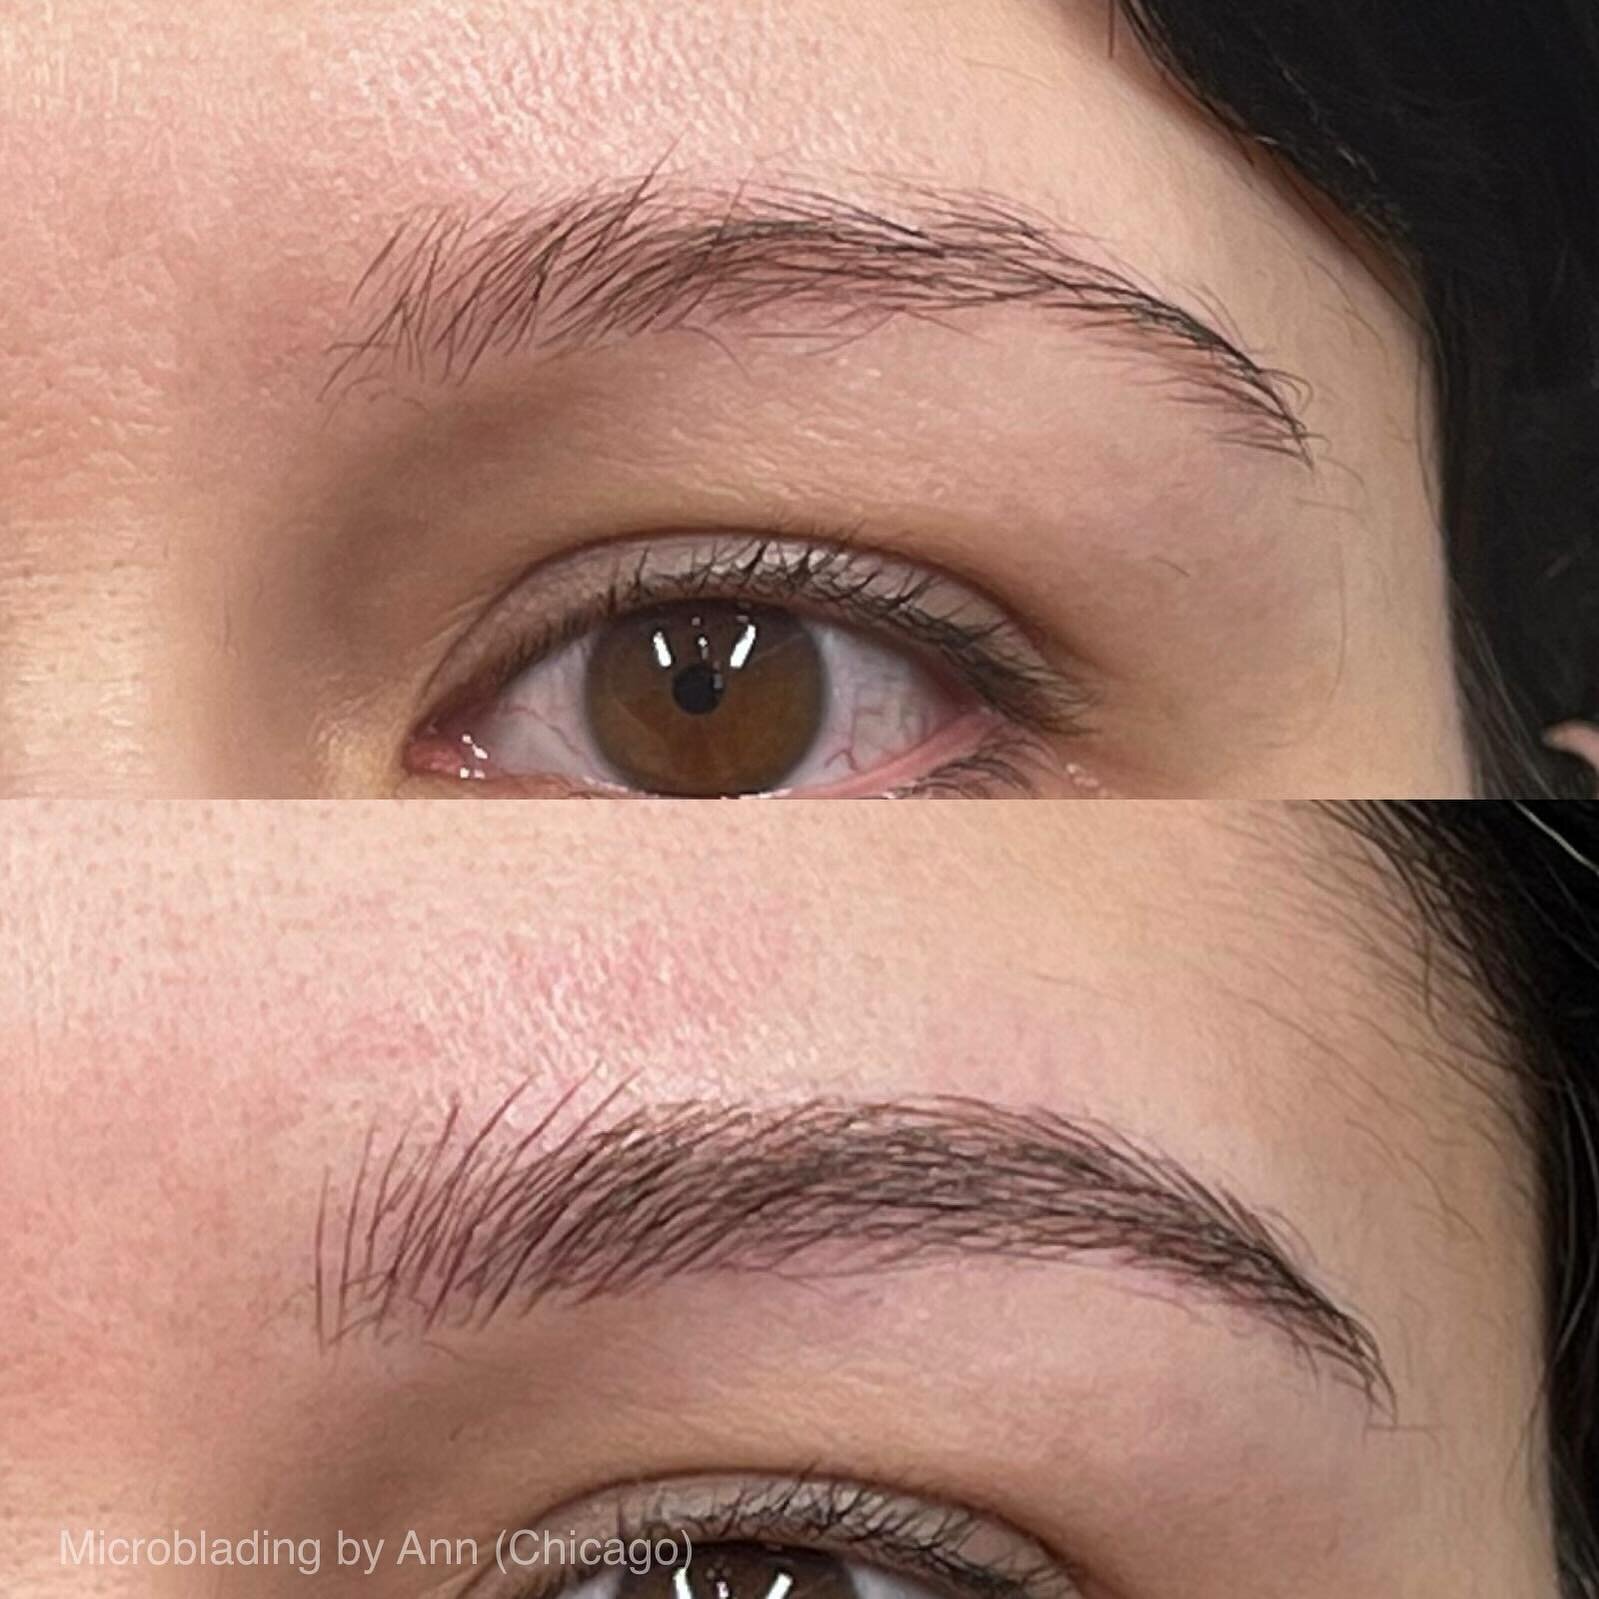 Ready for your close up! This is what we mean by natural-looking Microblading 🥰 
.
Microblading by Ann (Chicago). For more Chicago-specific results please follow @evertruesalon.chicago 
.
#microblading #microbladingchicago #chicago